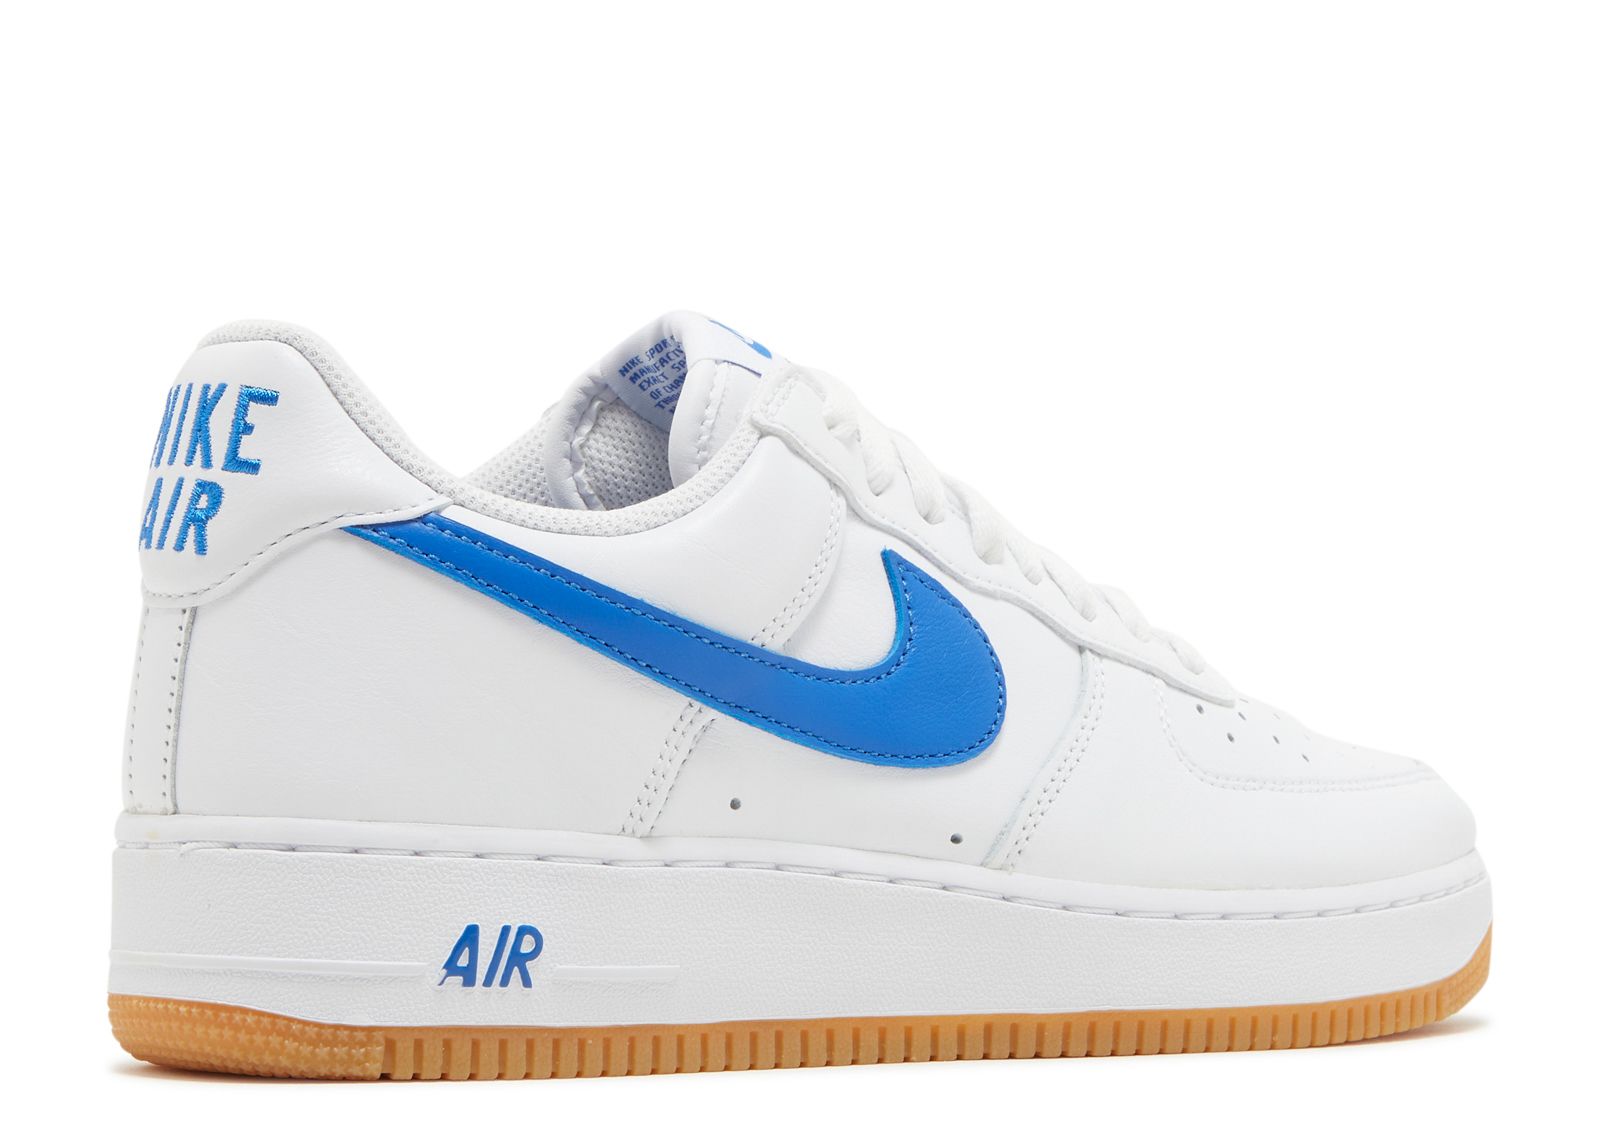 Nike Air Force 1 Low '07 Color of the Month Varsity Royal Gum